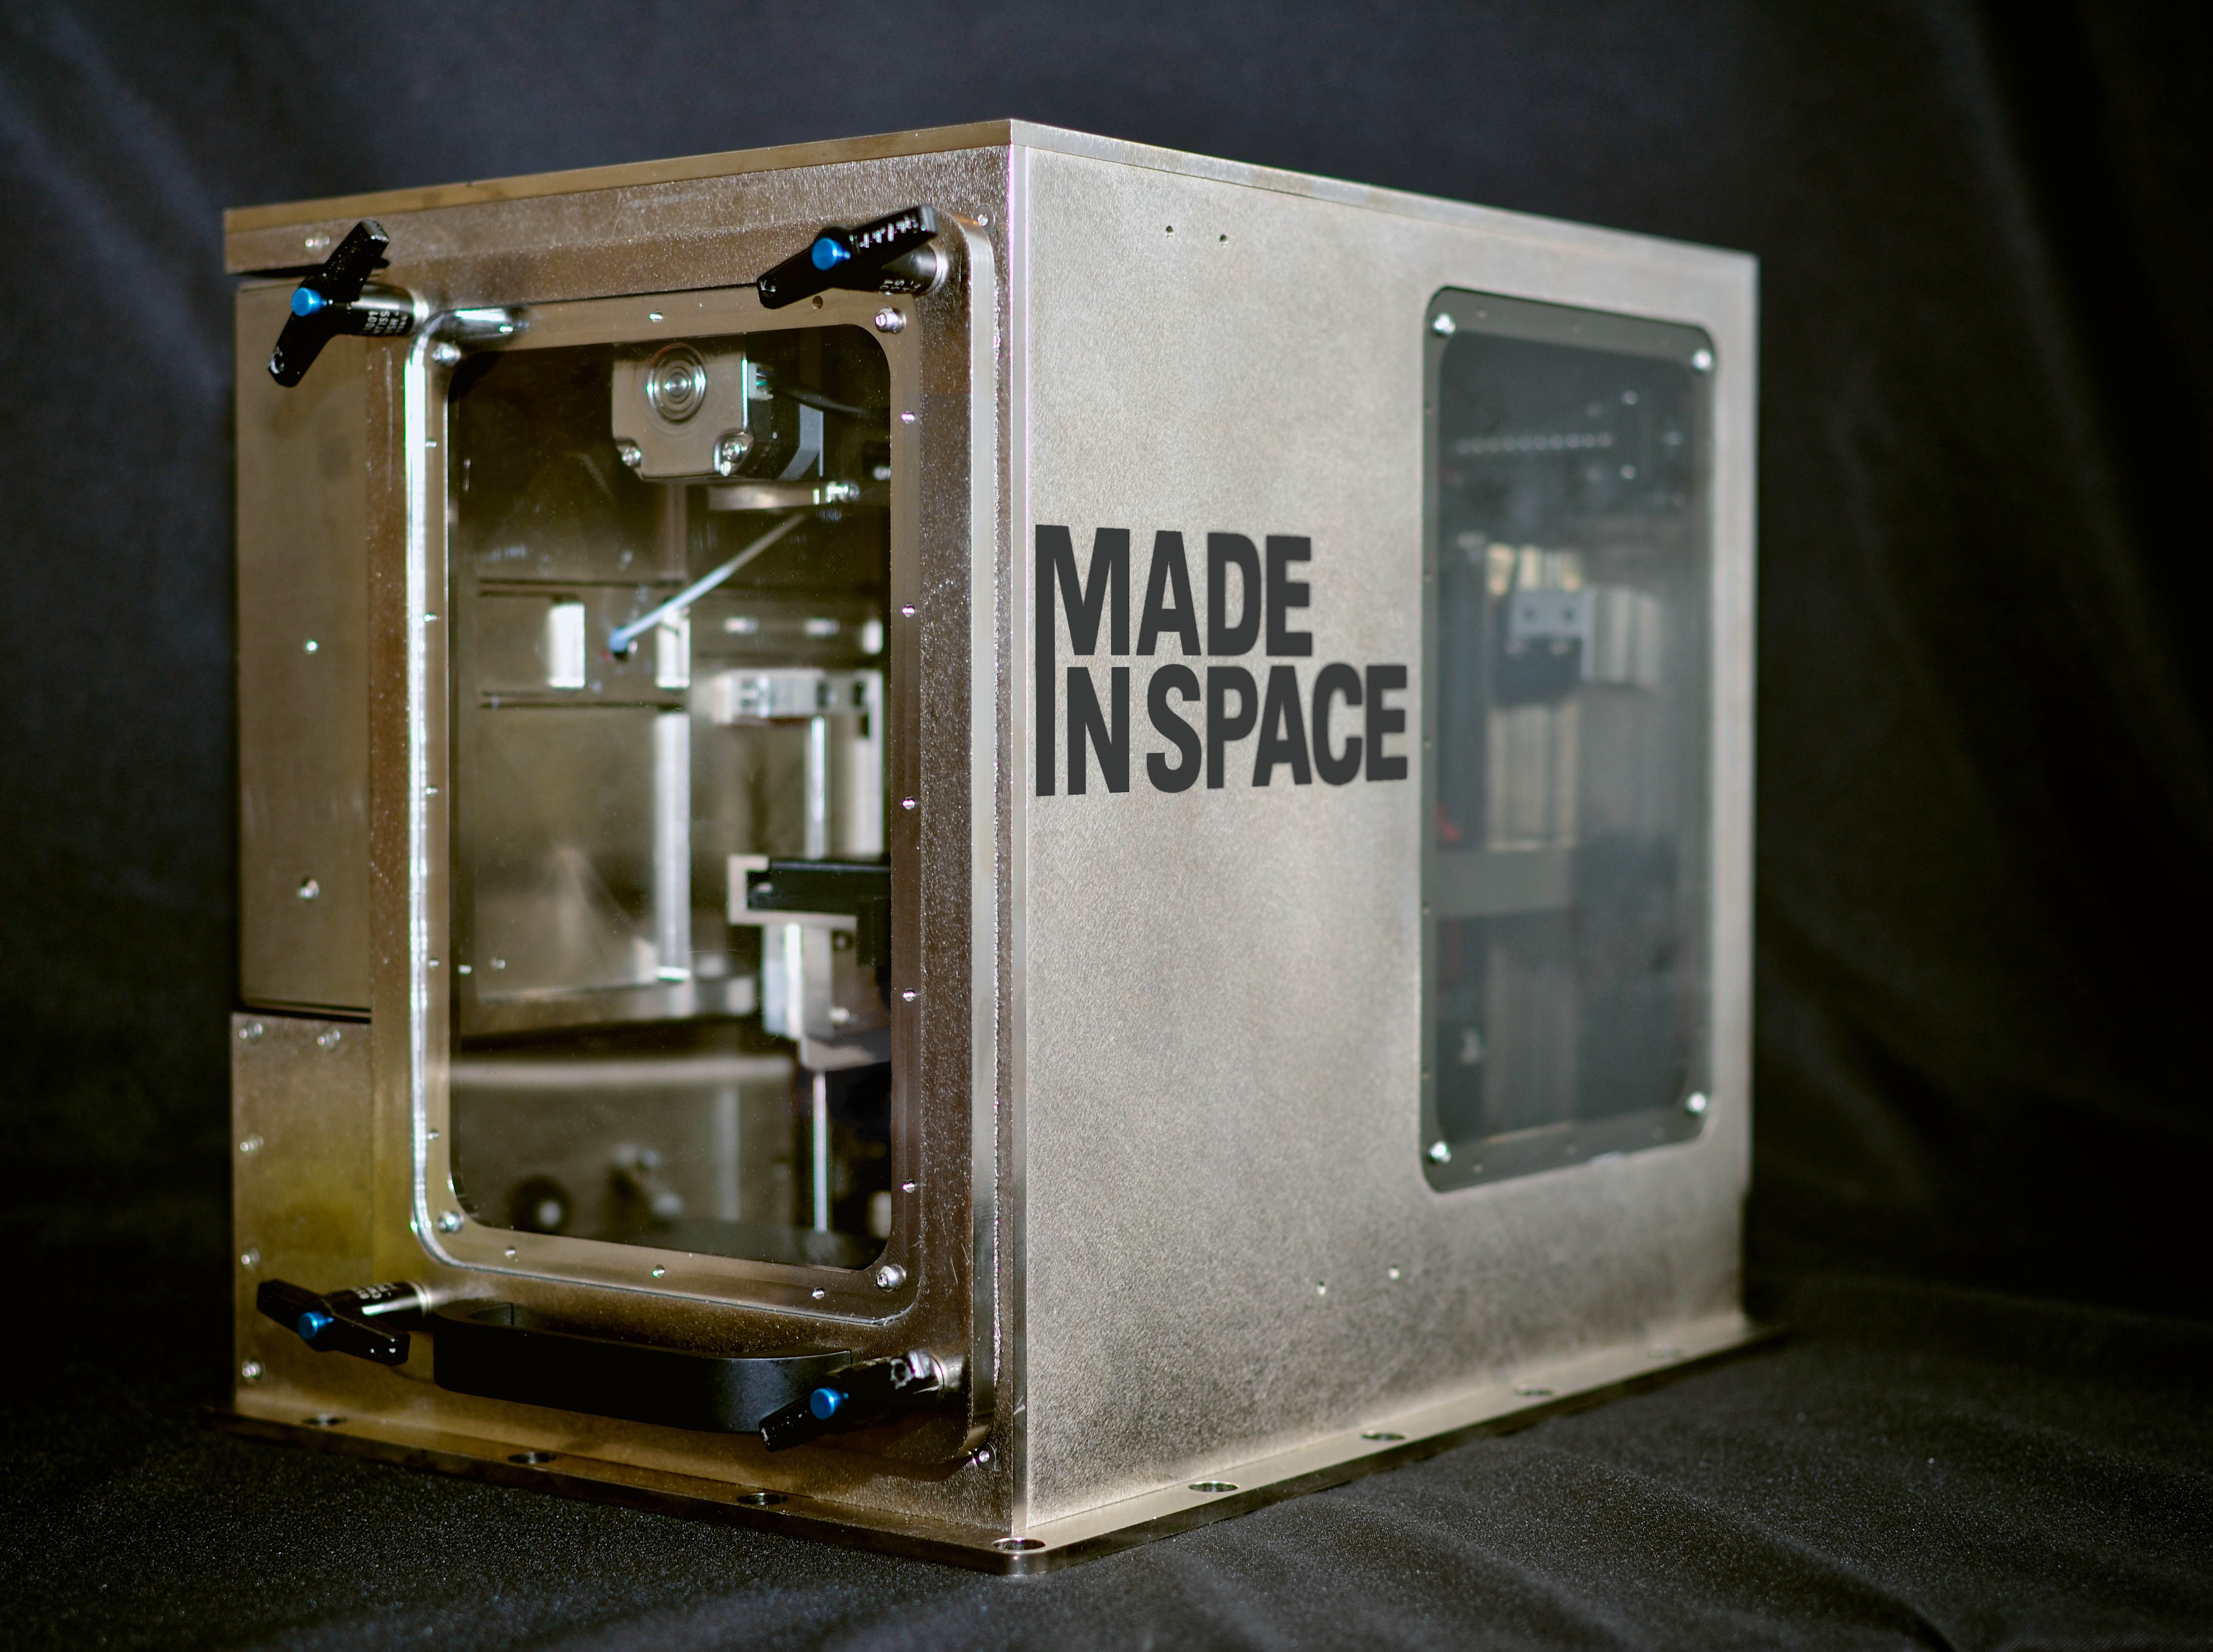 The Made In Space 3D printer will be the first manufacturing device ever used off Earth. It will be installed in the International Space Station to print a series of test items in 2014.